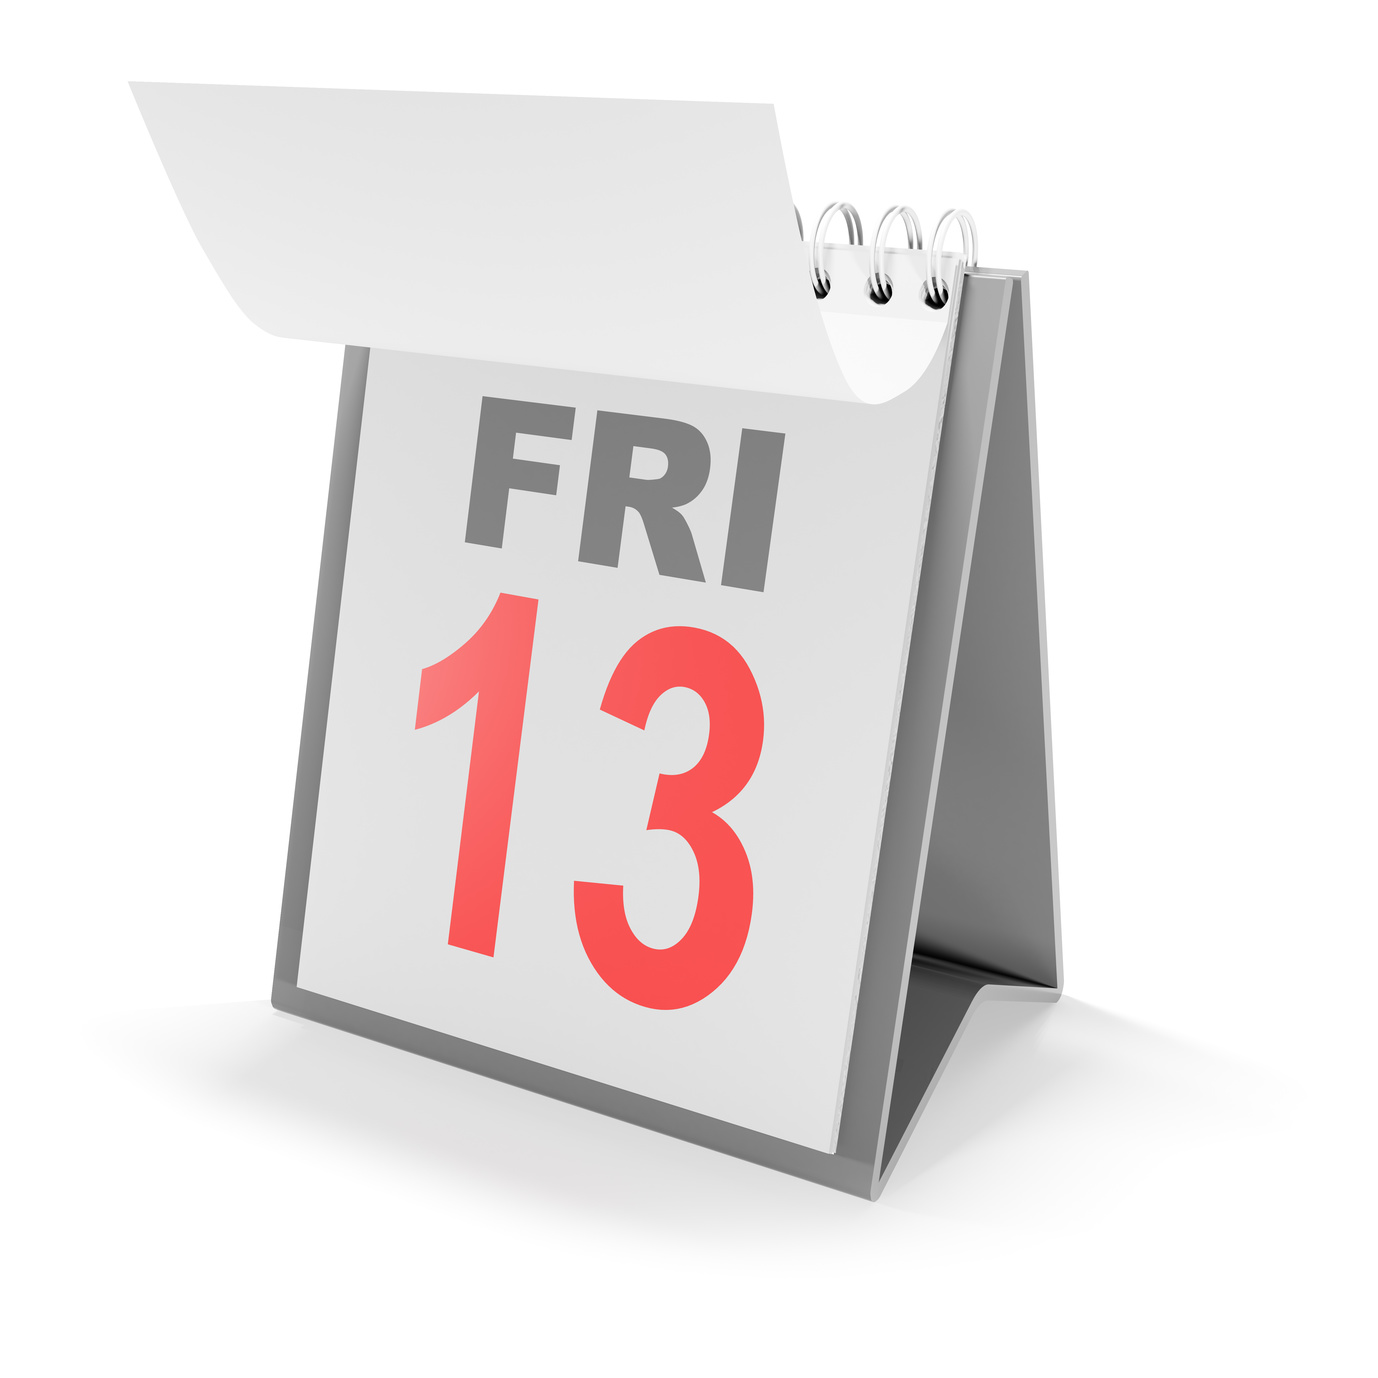 Friday the 13th and Other Superstitions